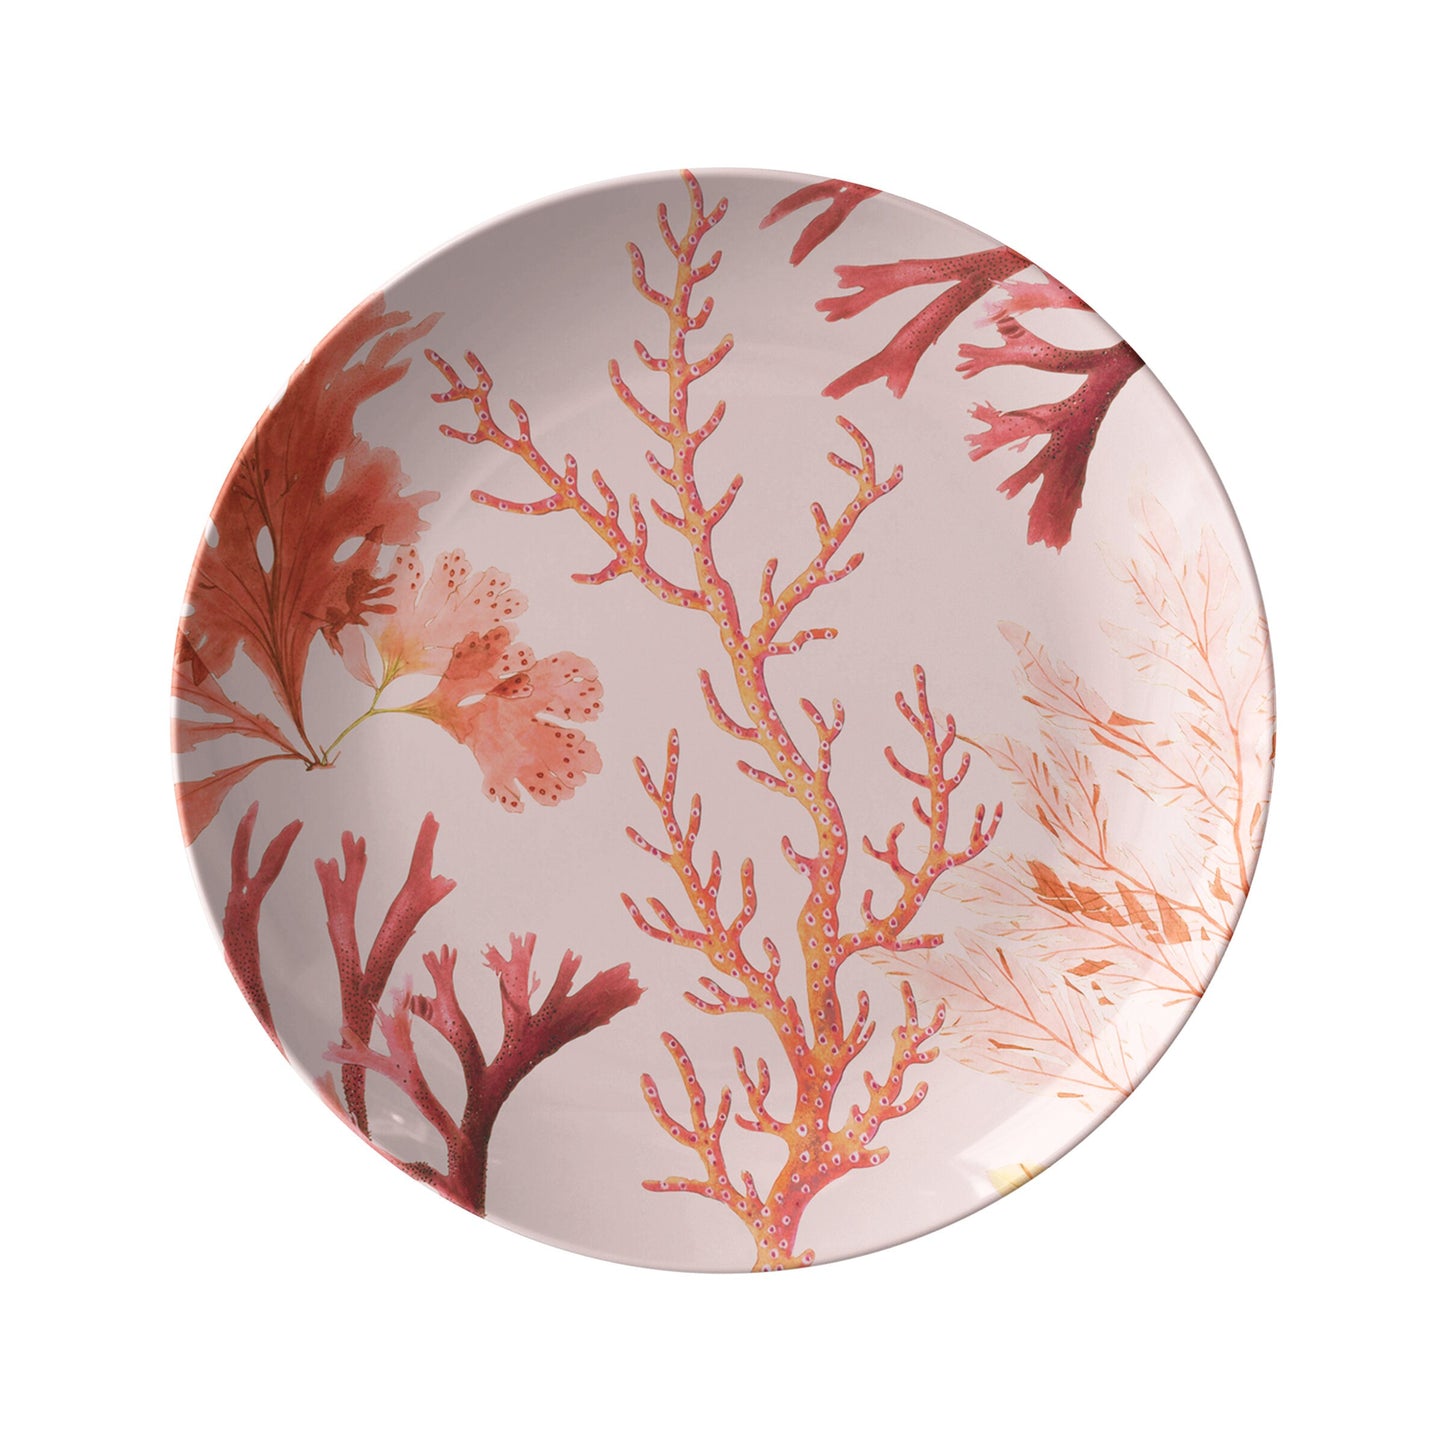 Coral Reef Plates, Set of 4, Pale Pink, Luxury Thermosaf Plastic